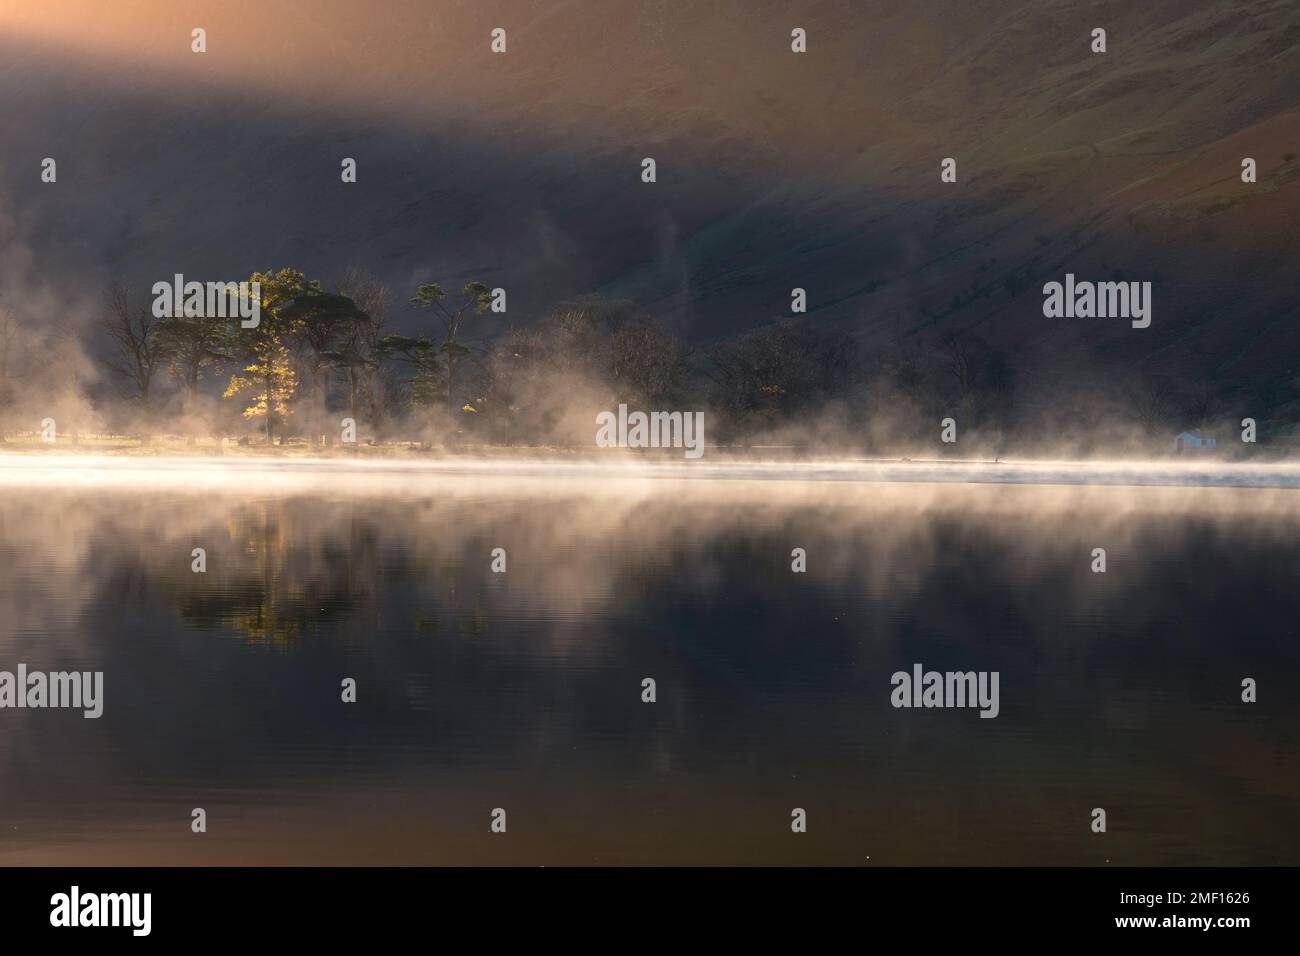 Misty sunrise with row of Pine trees giving perfect reflections in Buttermere, Lake District, UK. Stock Photo